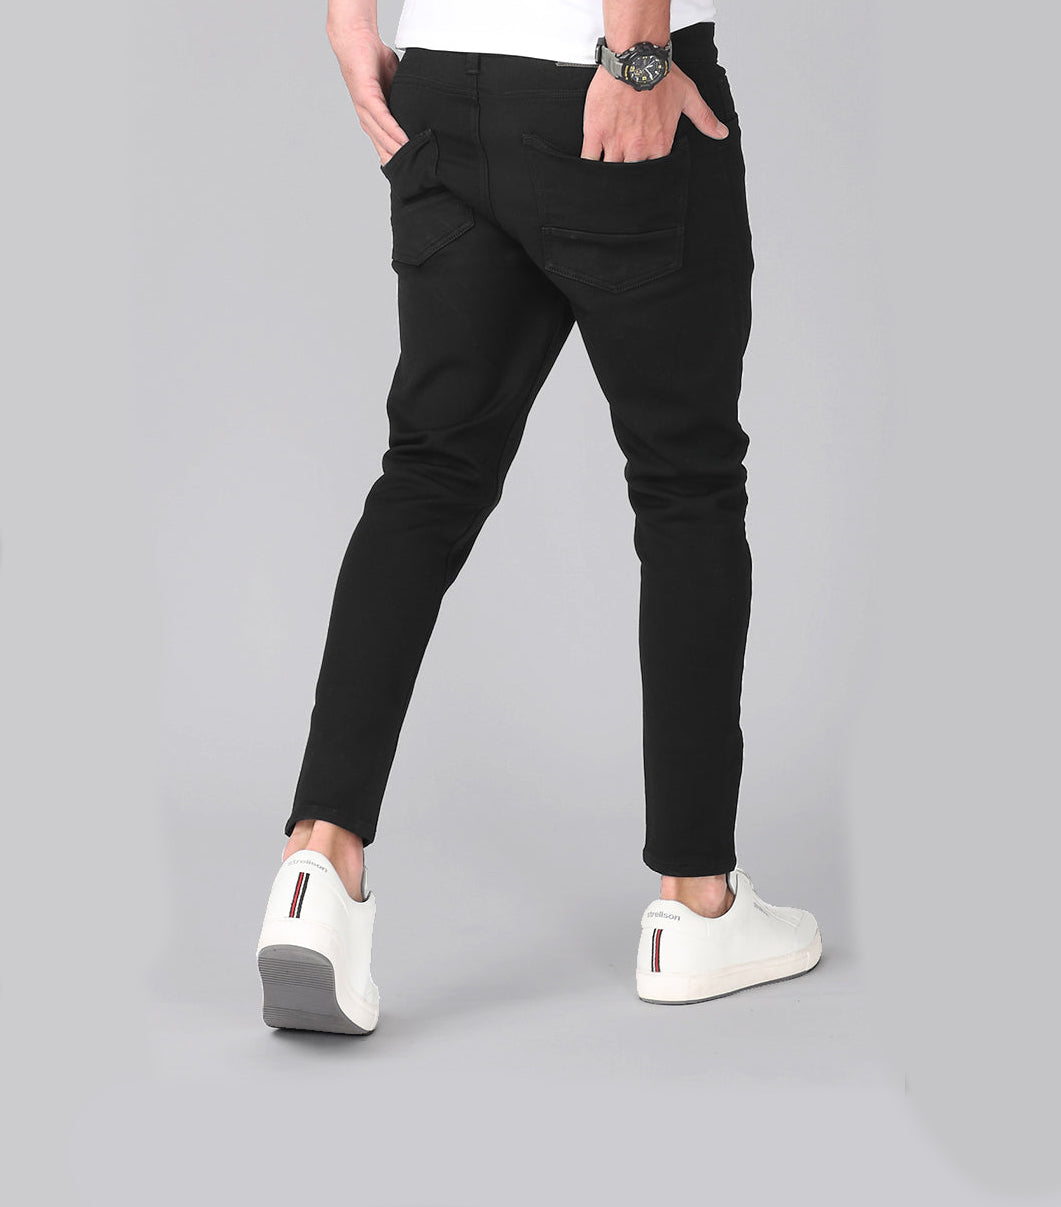 Timeless Black Jeans - Elevate Your Style with BWOLVES